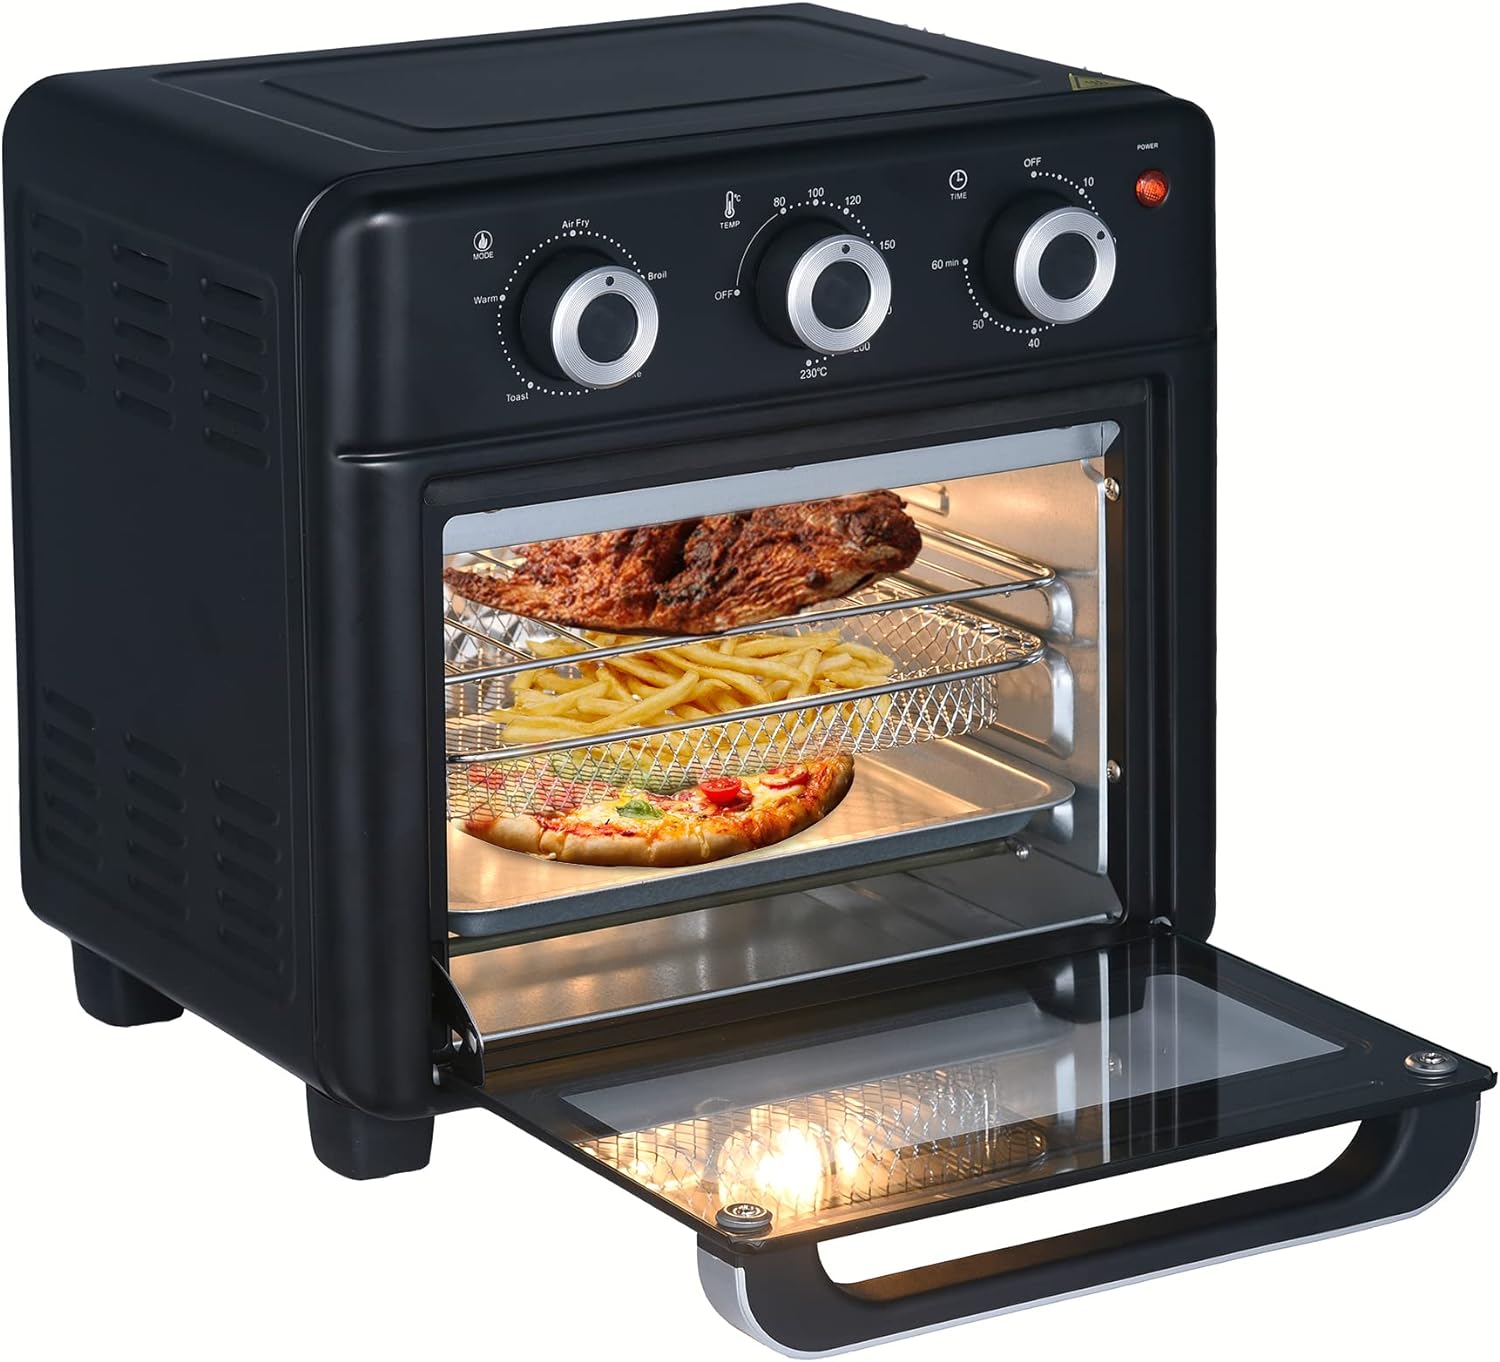 Belaco 15L Air Fryer Oven 1200w Mini Oven Multifunction Countertop Convection Toaster Oven and Grill, Double Layered Glass Door 80-230° Temp Setting, Healthy Oil Free Heating